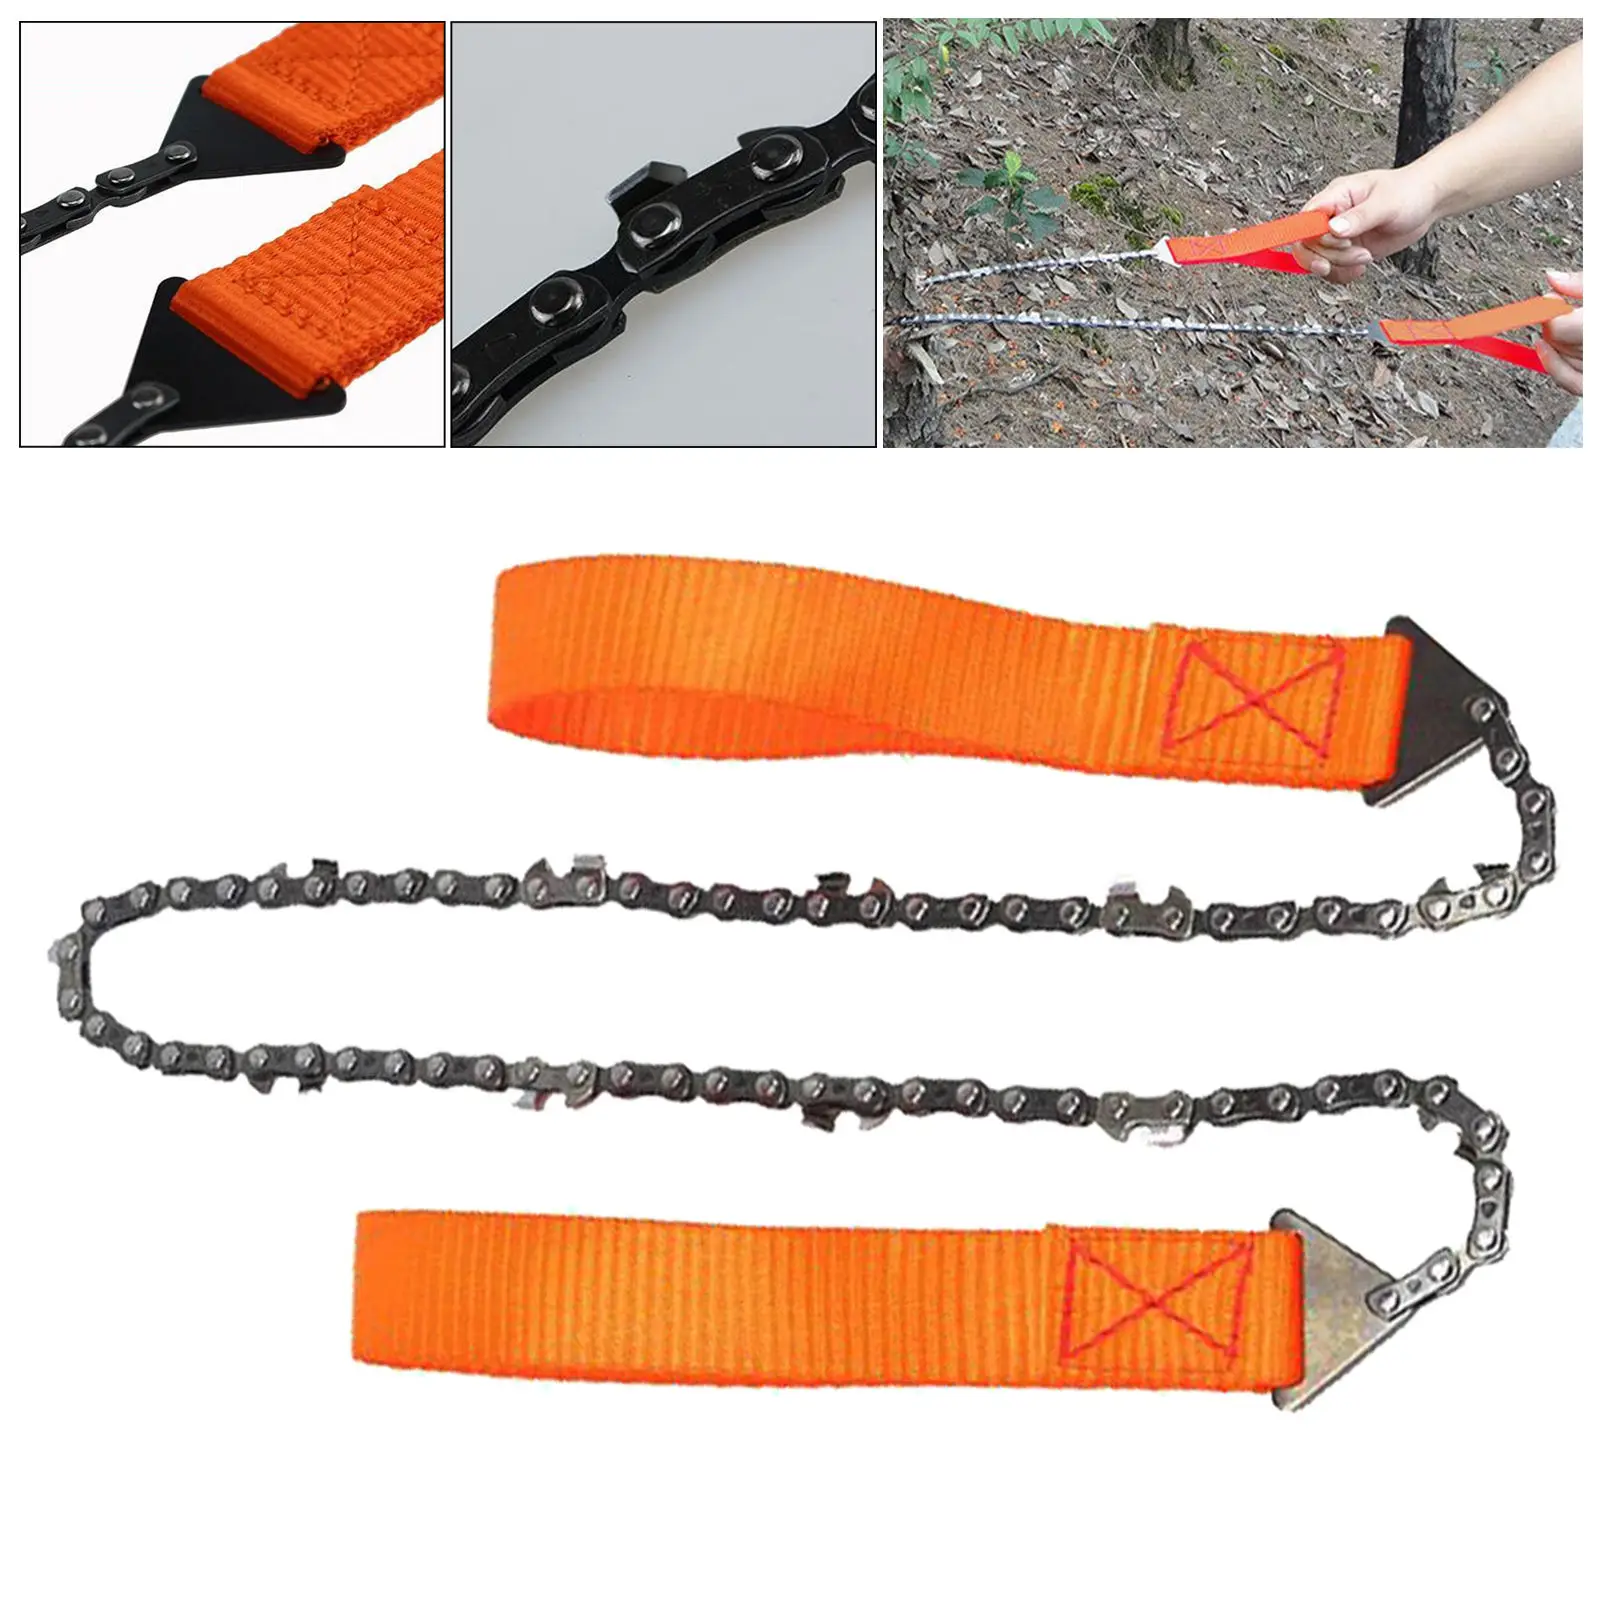   Wire Saw Chainsaw Camping Hiking Hunting Survival Emergency Kit